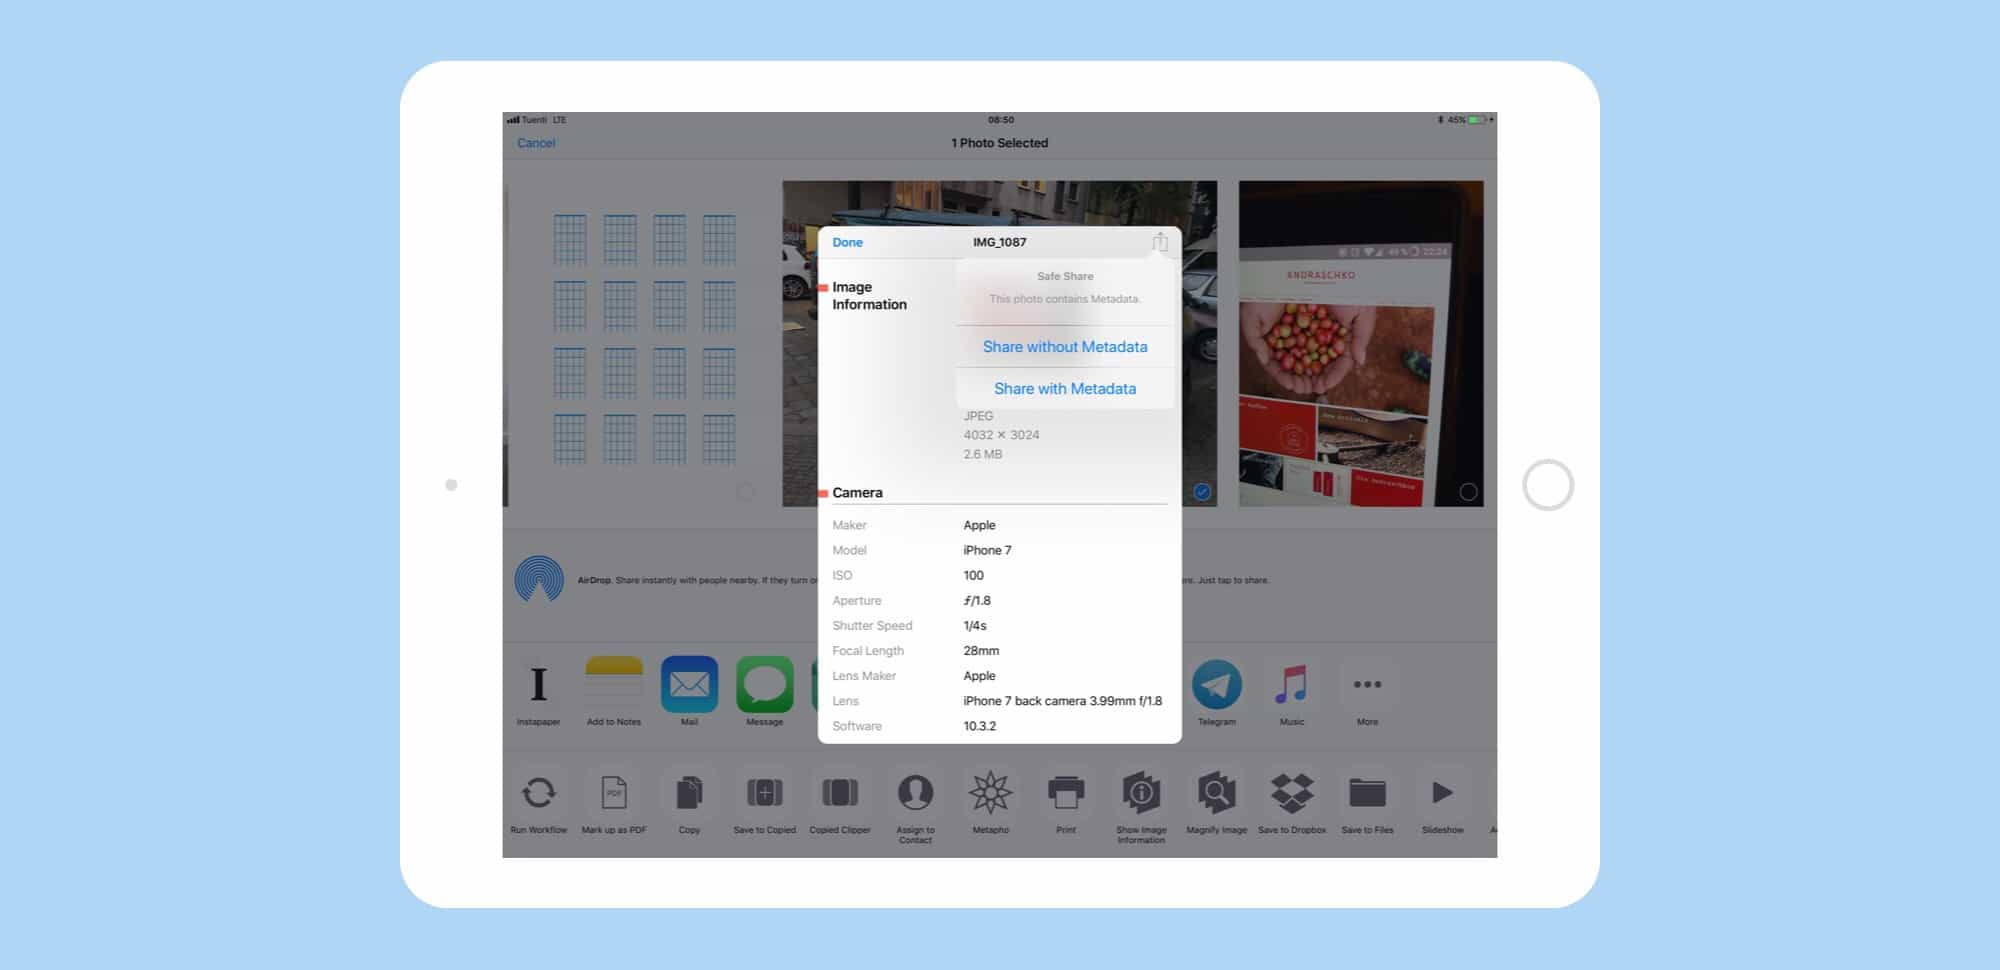 With a couple of extra taps, you can remove metadata from your photos before sharing. 